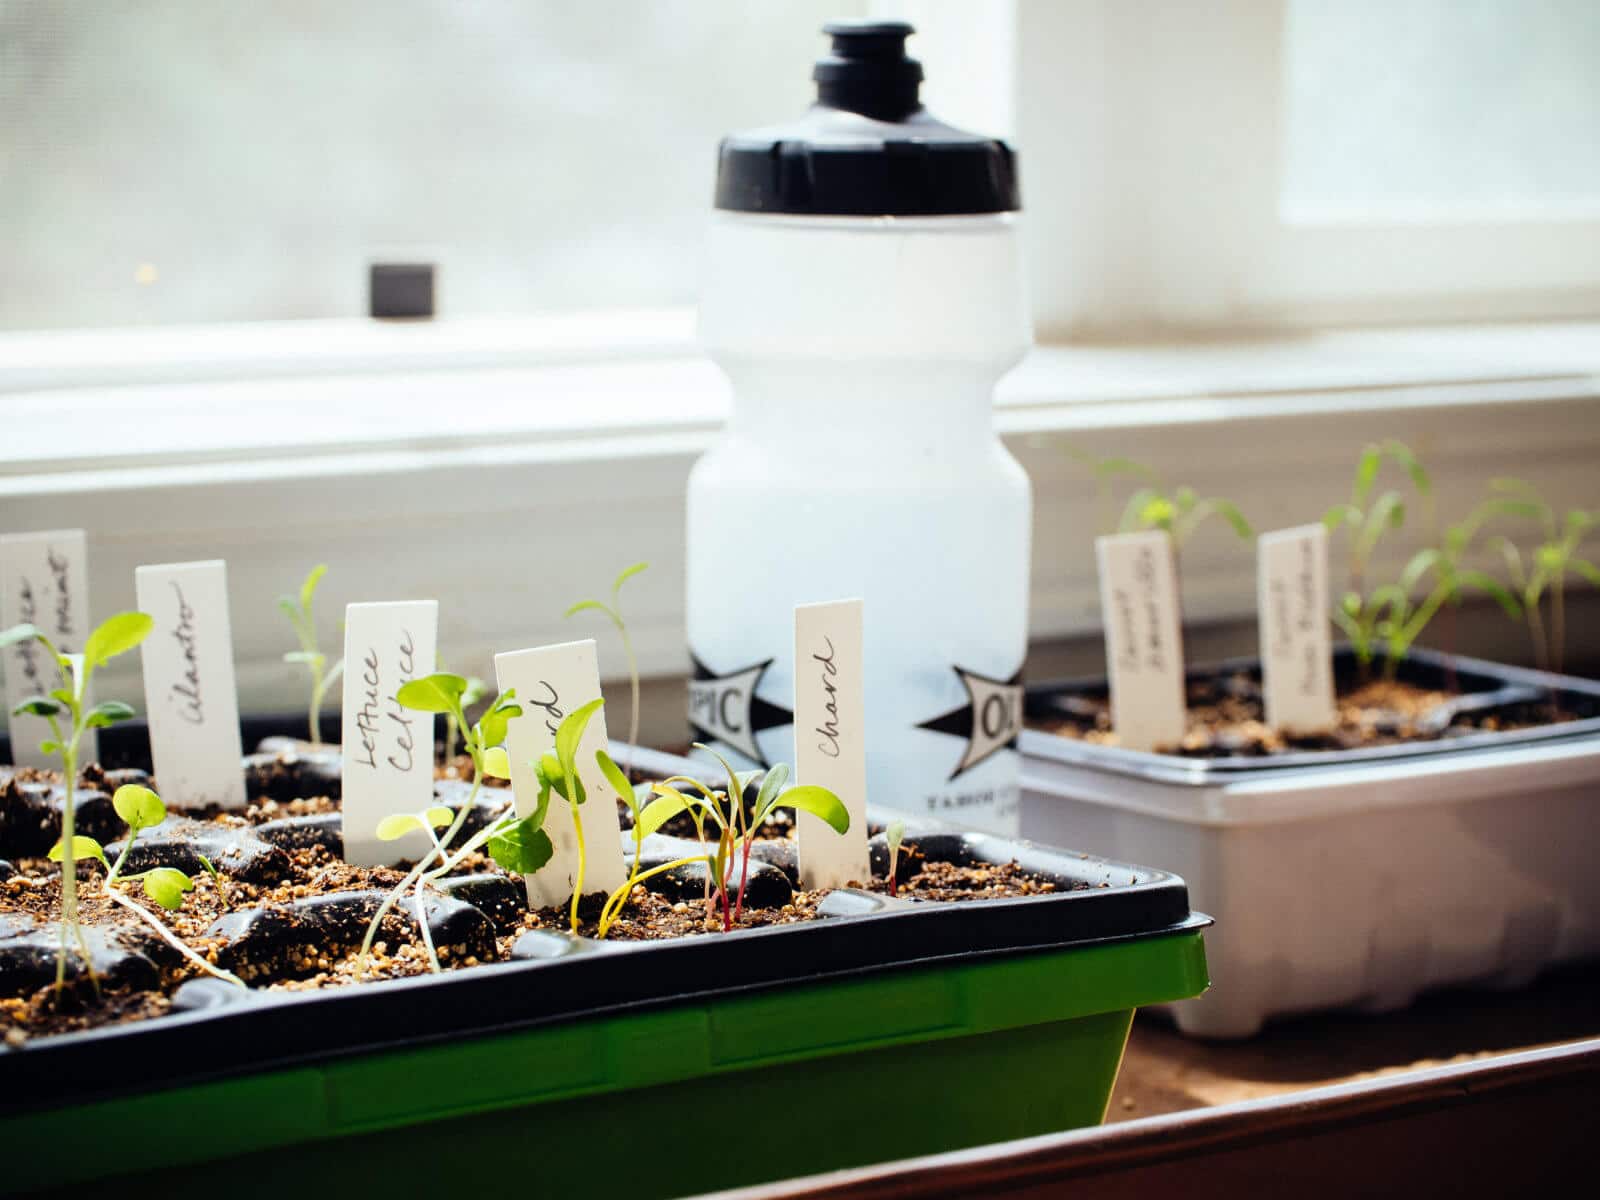 Give your new seedlings plenty of light and warmth for fast growth